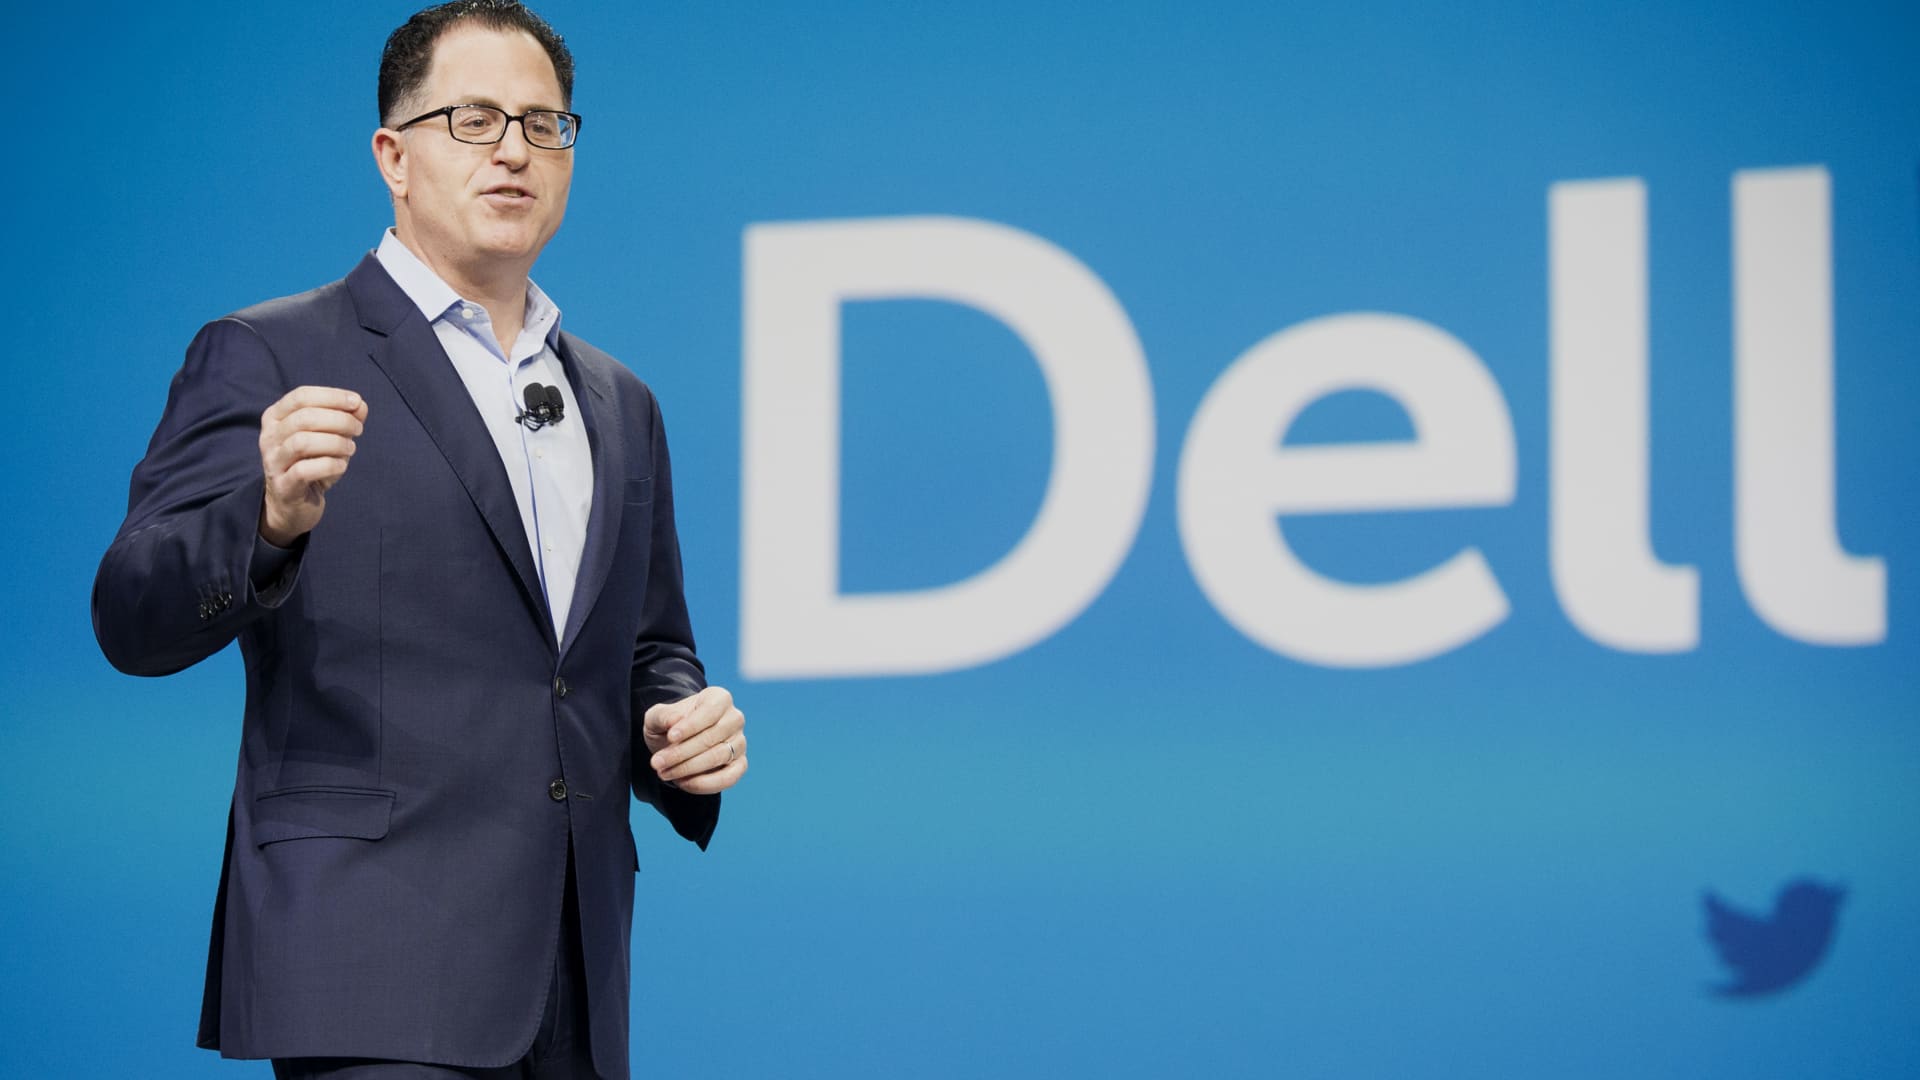 Dell shares soar 20% after beating earnings expectations, cites rising demand for AI servers